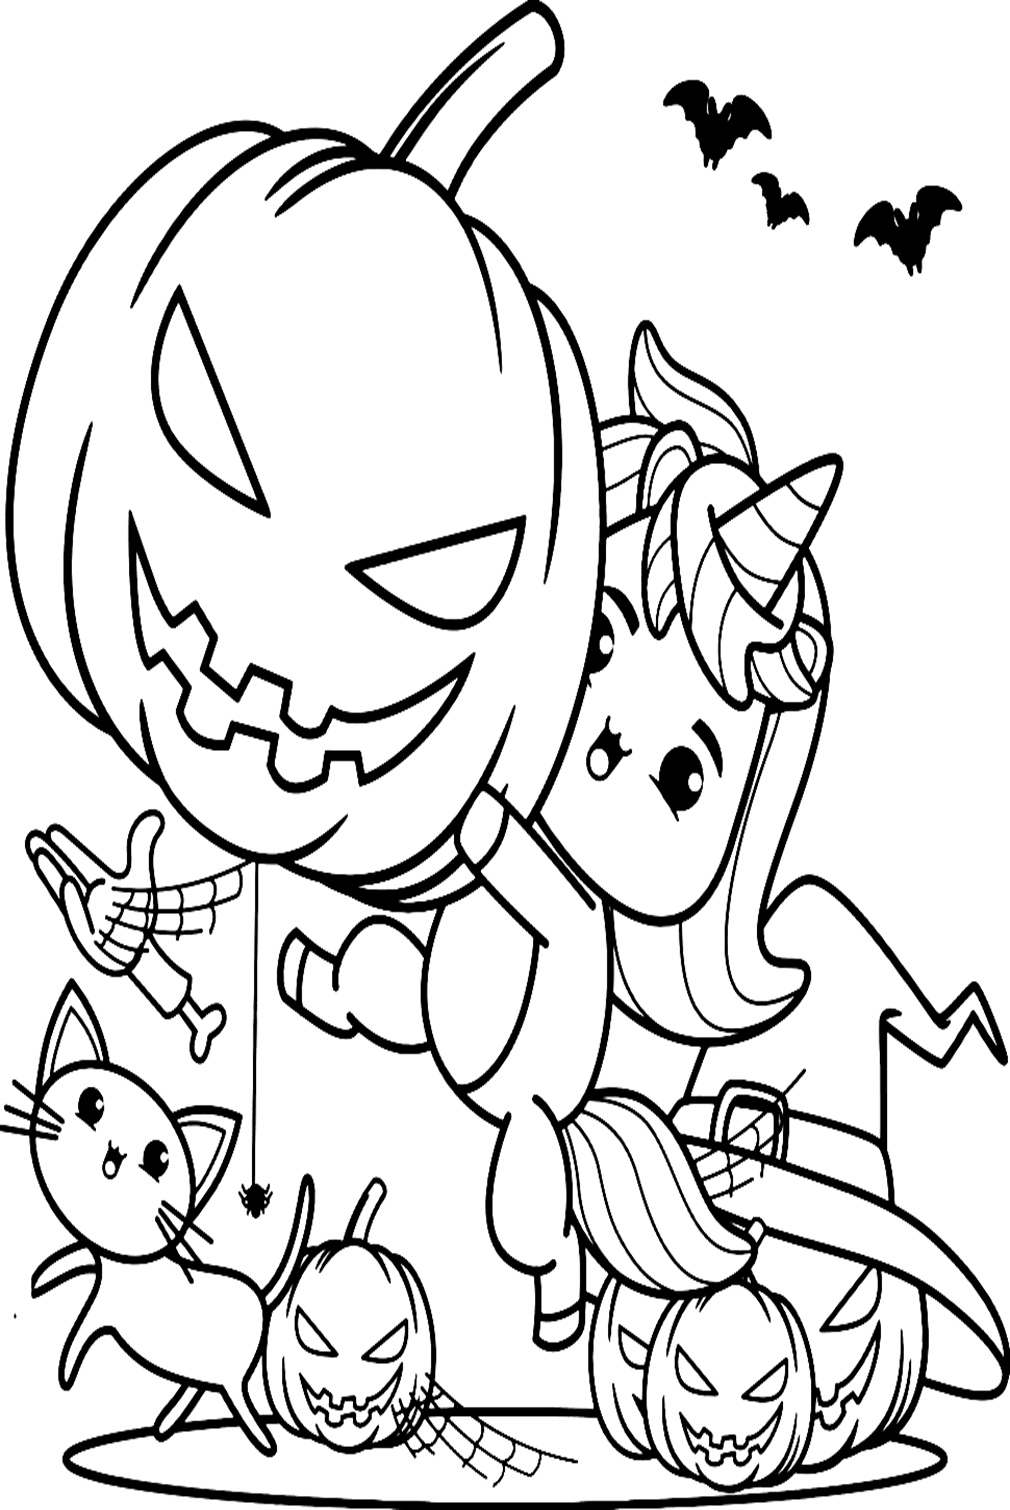 Halloween Unicorn Coloring Pages - Free Printable Coloring Pages